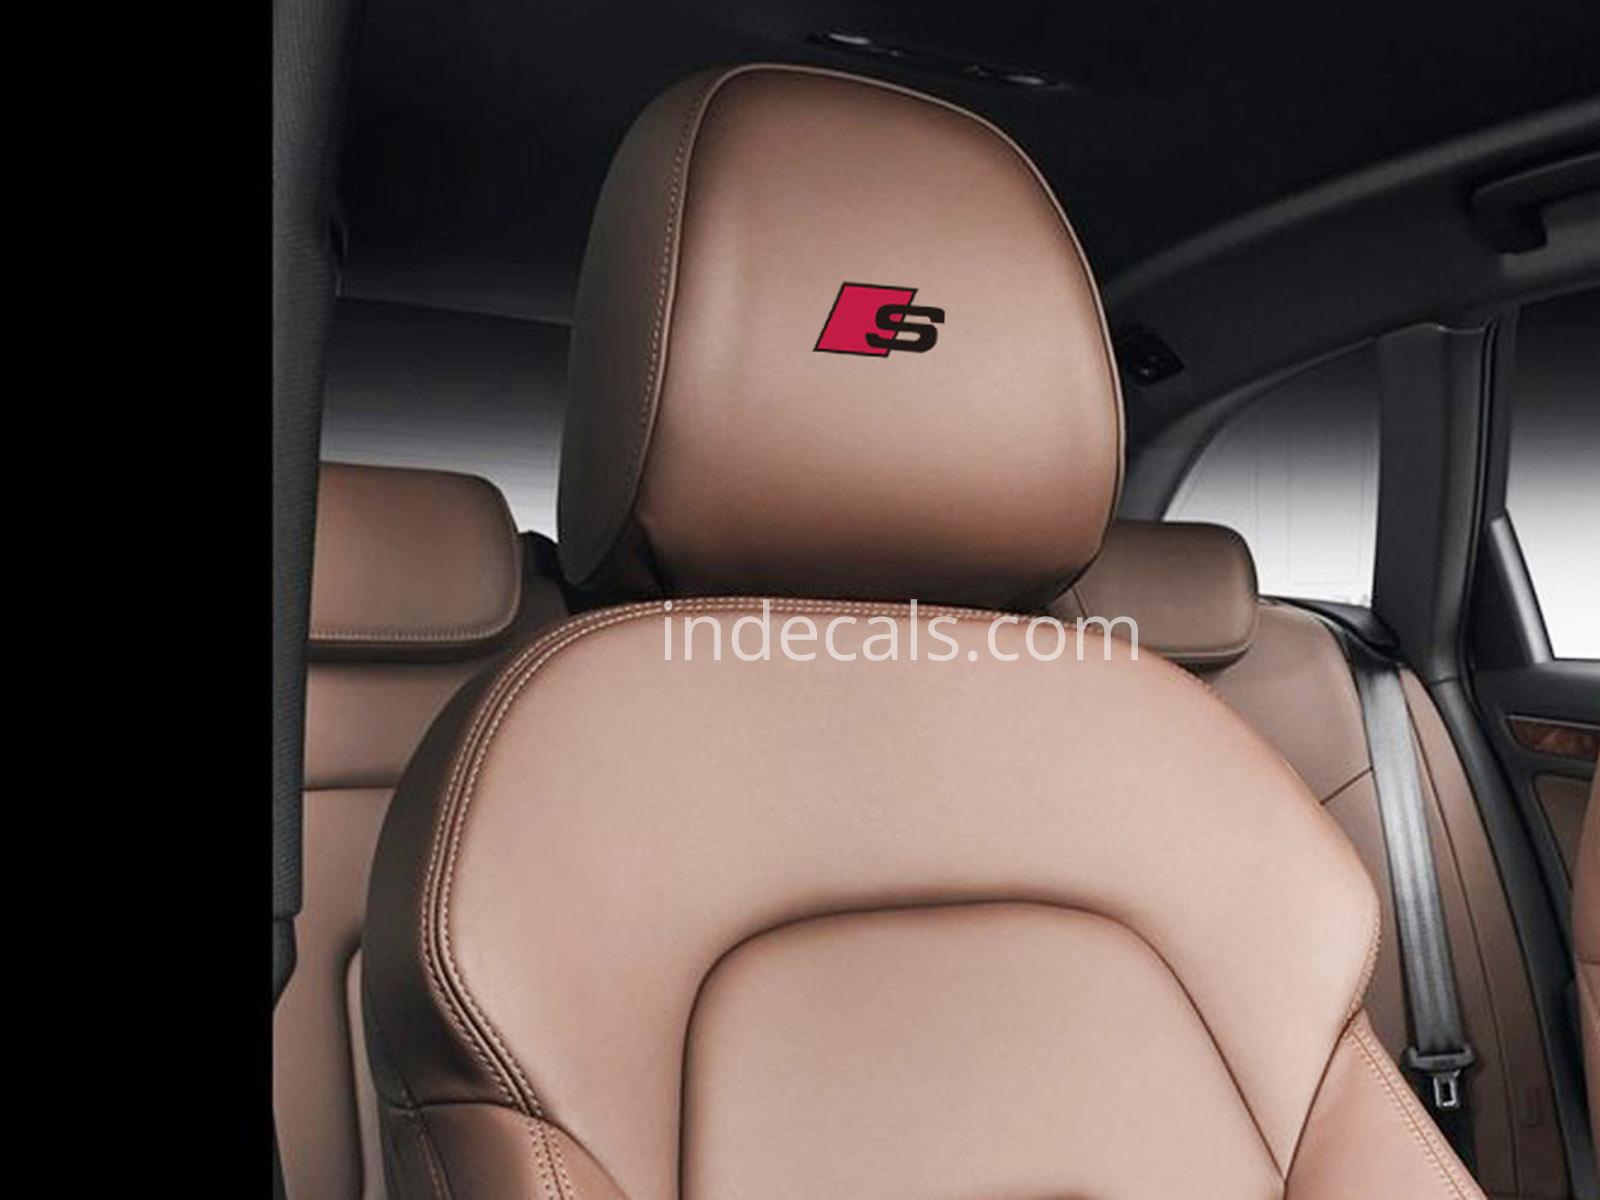 5 x Audi S-Line Stickers for Headrests - Black + Red